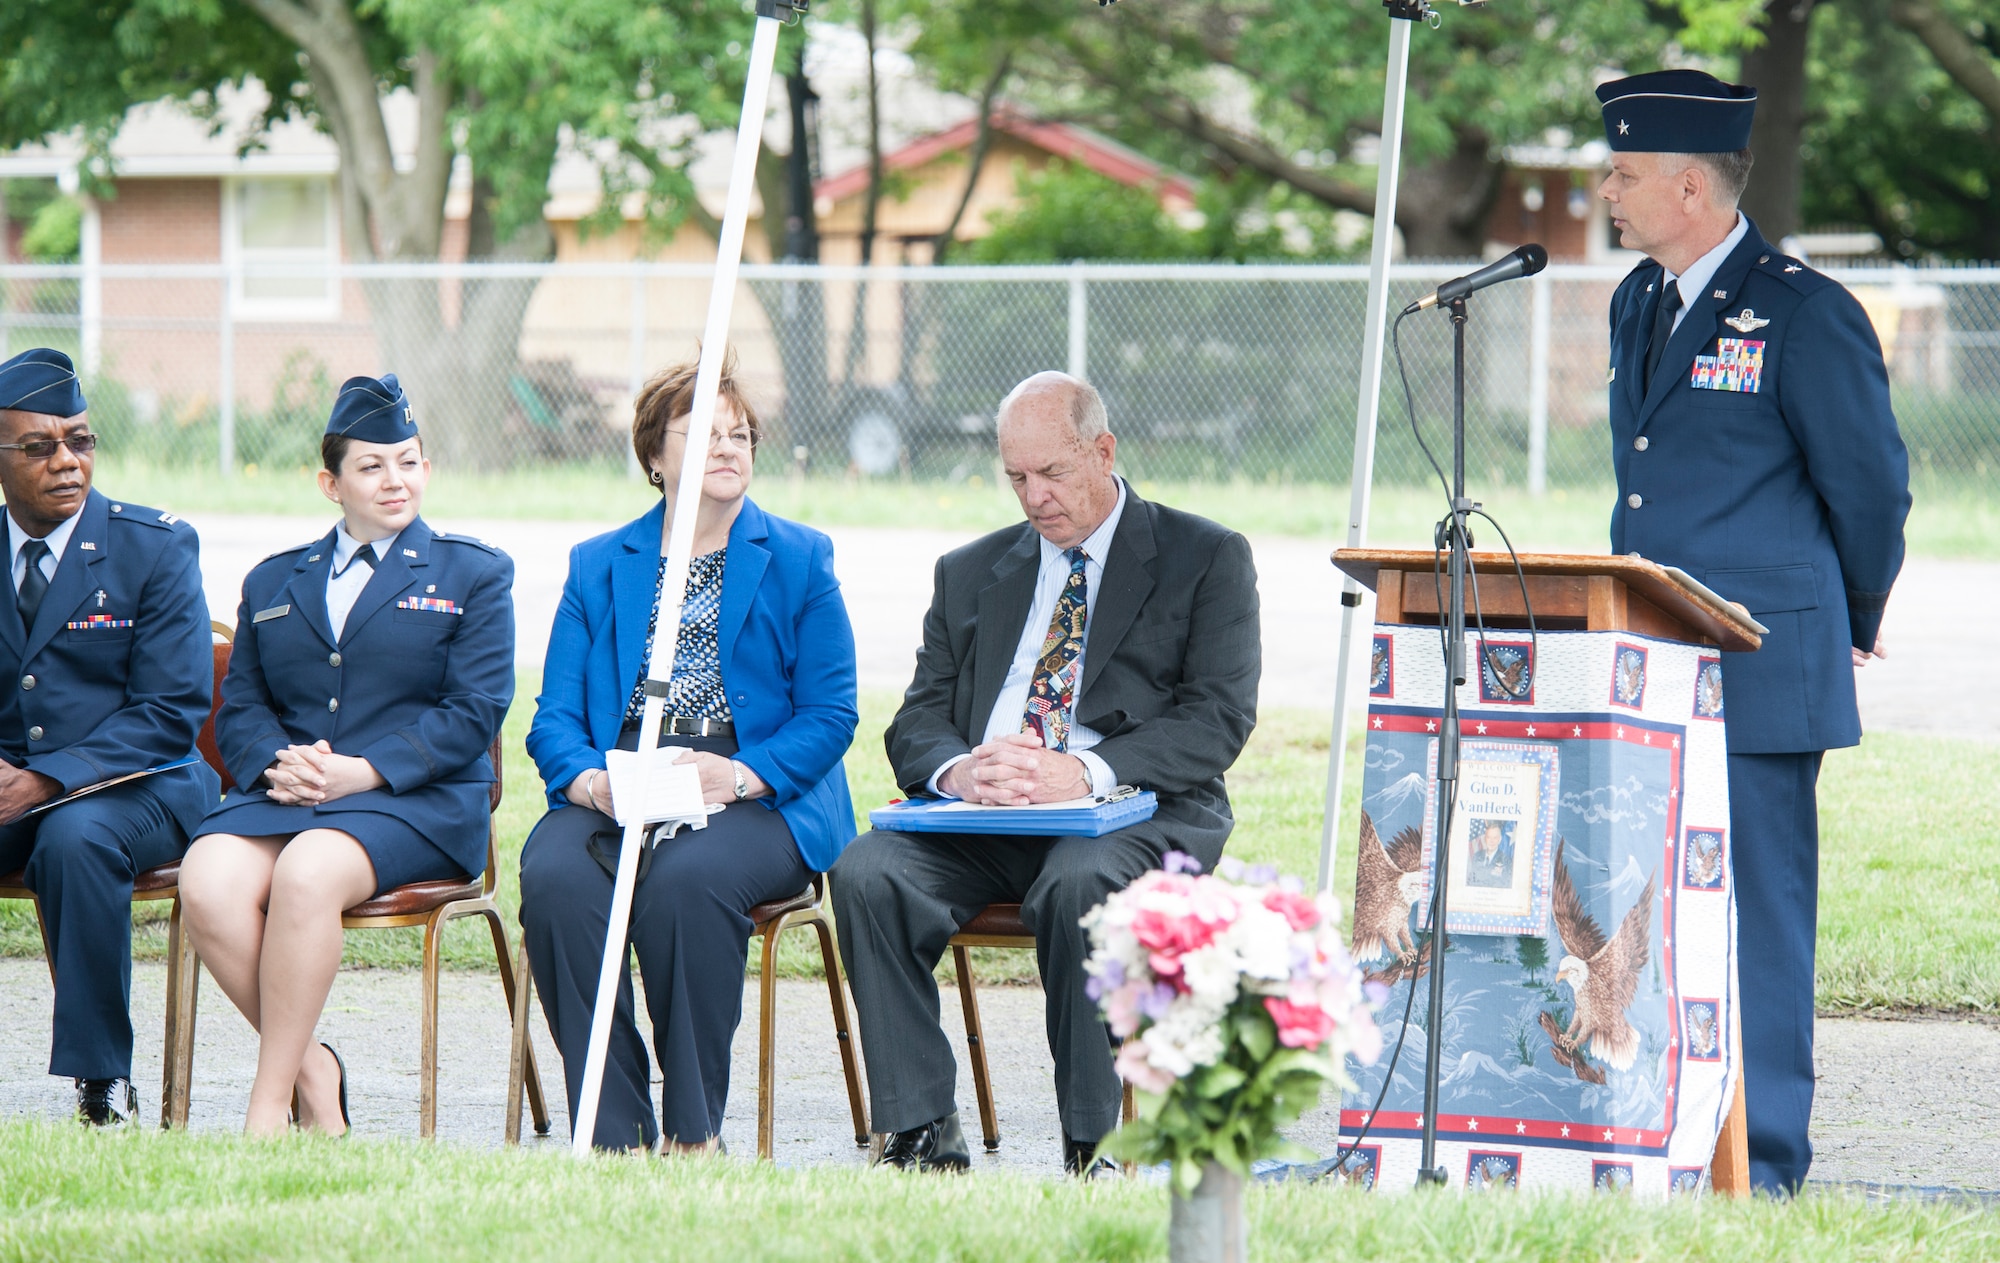 U.S. Air Force Brig. Gen. Glen VanHerck, right, 509th Bomb Wing commander from Whiteman Air Force Base, speaks at the annual wreath-laying ceremony for 2nd Lt. George Whiteman May 16, 2015, in Sedalia, Mo. Whiteman was one of the first Airmen killed in World War II when his plane was shot down during the Japanese attack on Pearl Harbor. (U.S. Air Force photo by Staff Sgt. Brigitte N. Brantley/Released)